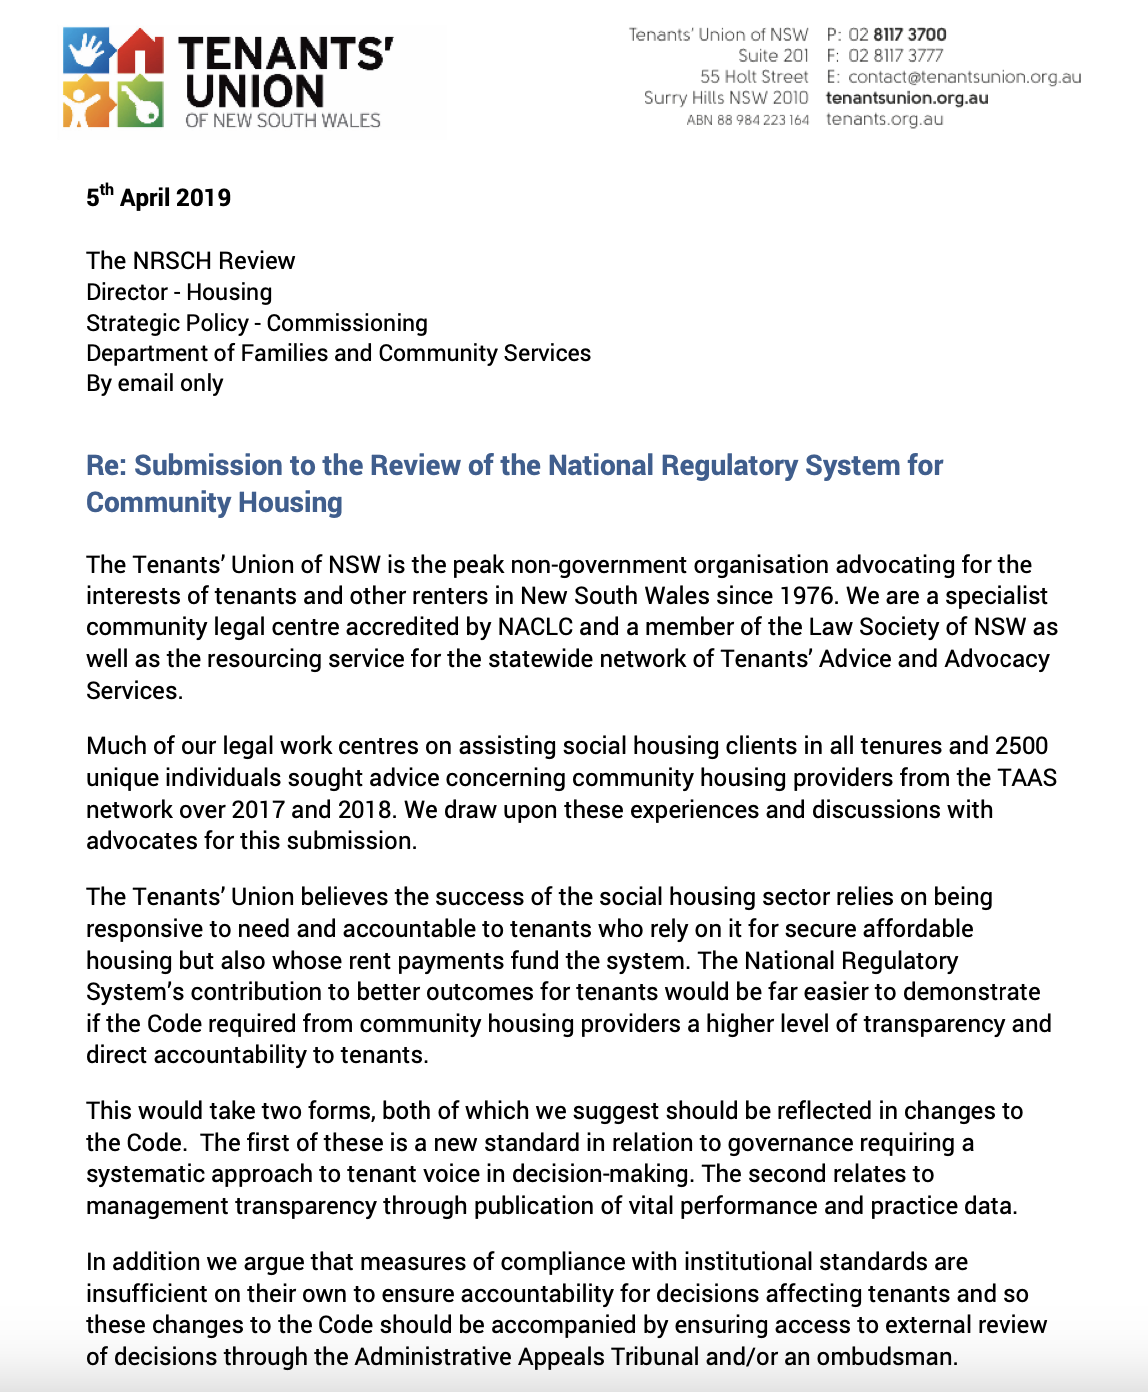 Front Page of TUNSW's Submission to the Review of the National Regulatory System for Community Housing